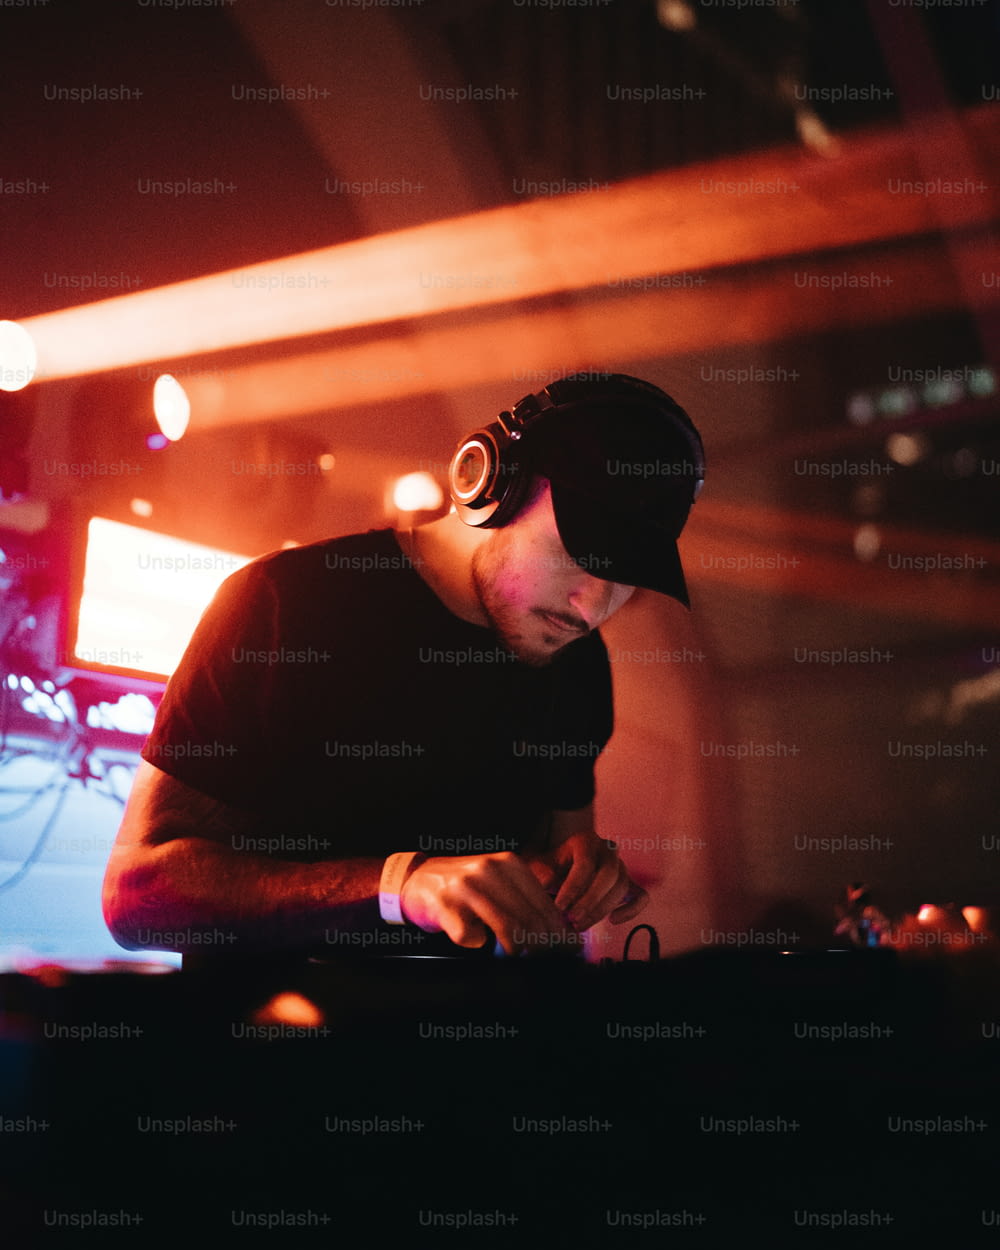 a man in a black hat is playing a dj's turntable